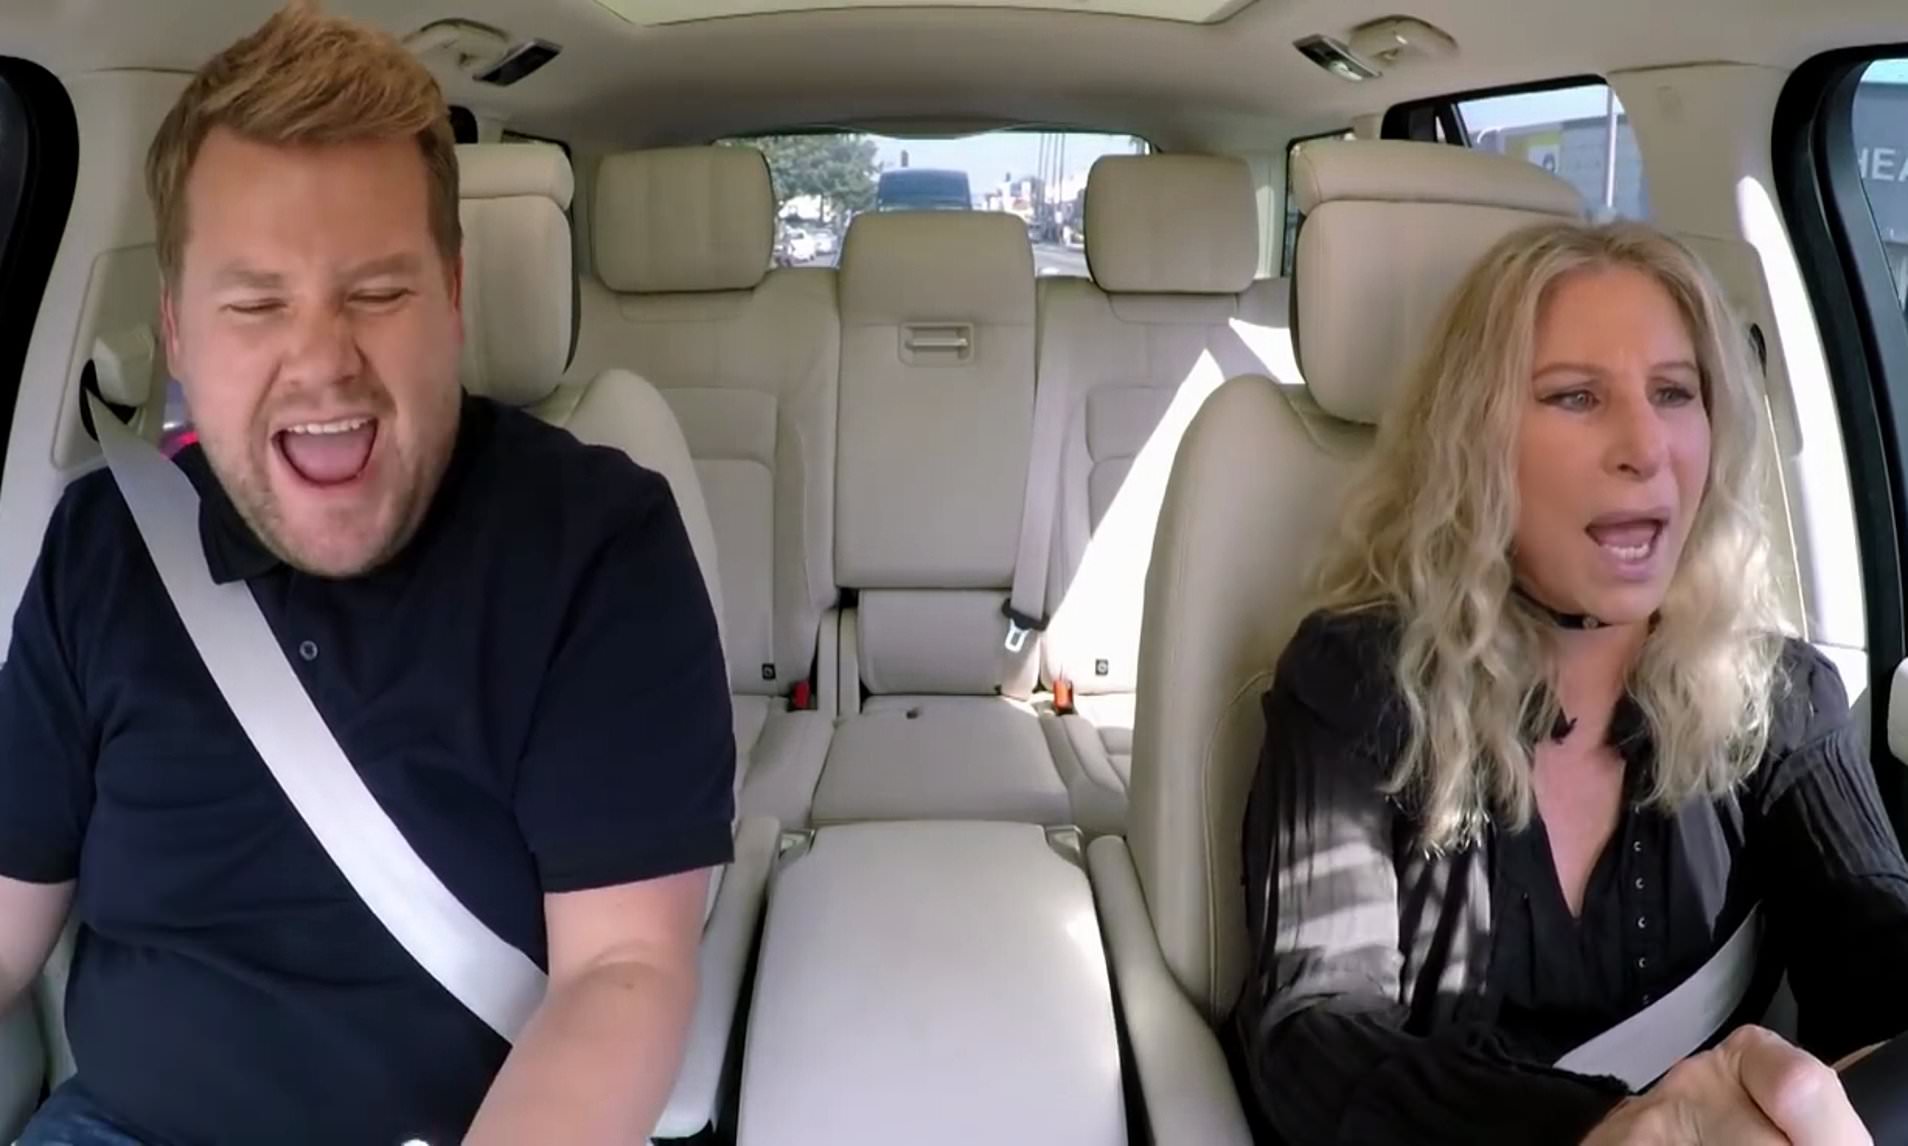 See All the 2020 Grammy Nominees’ “Carpool Karaoke” Videos In One Place